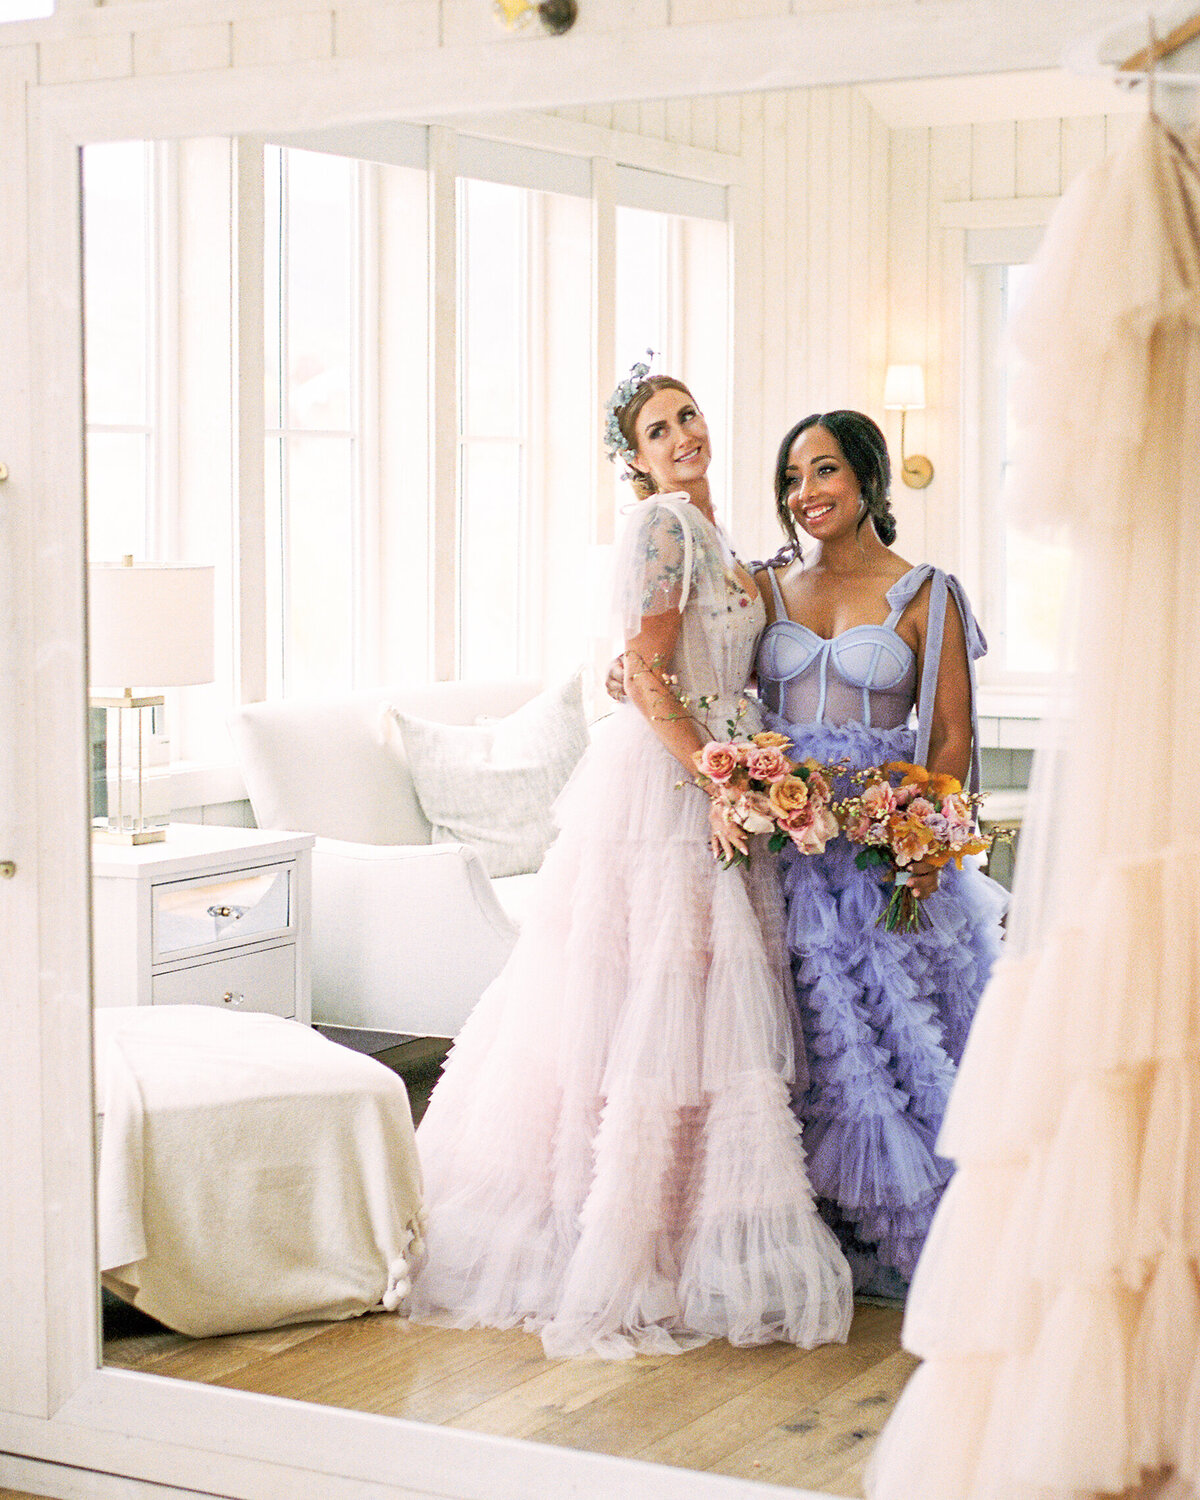 Bride and bridesmaid look in the mirror and smile